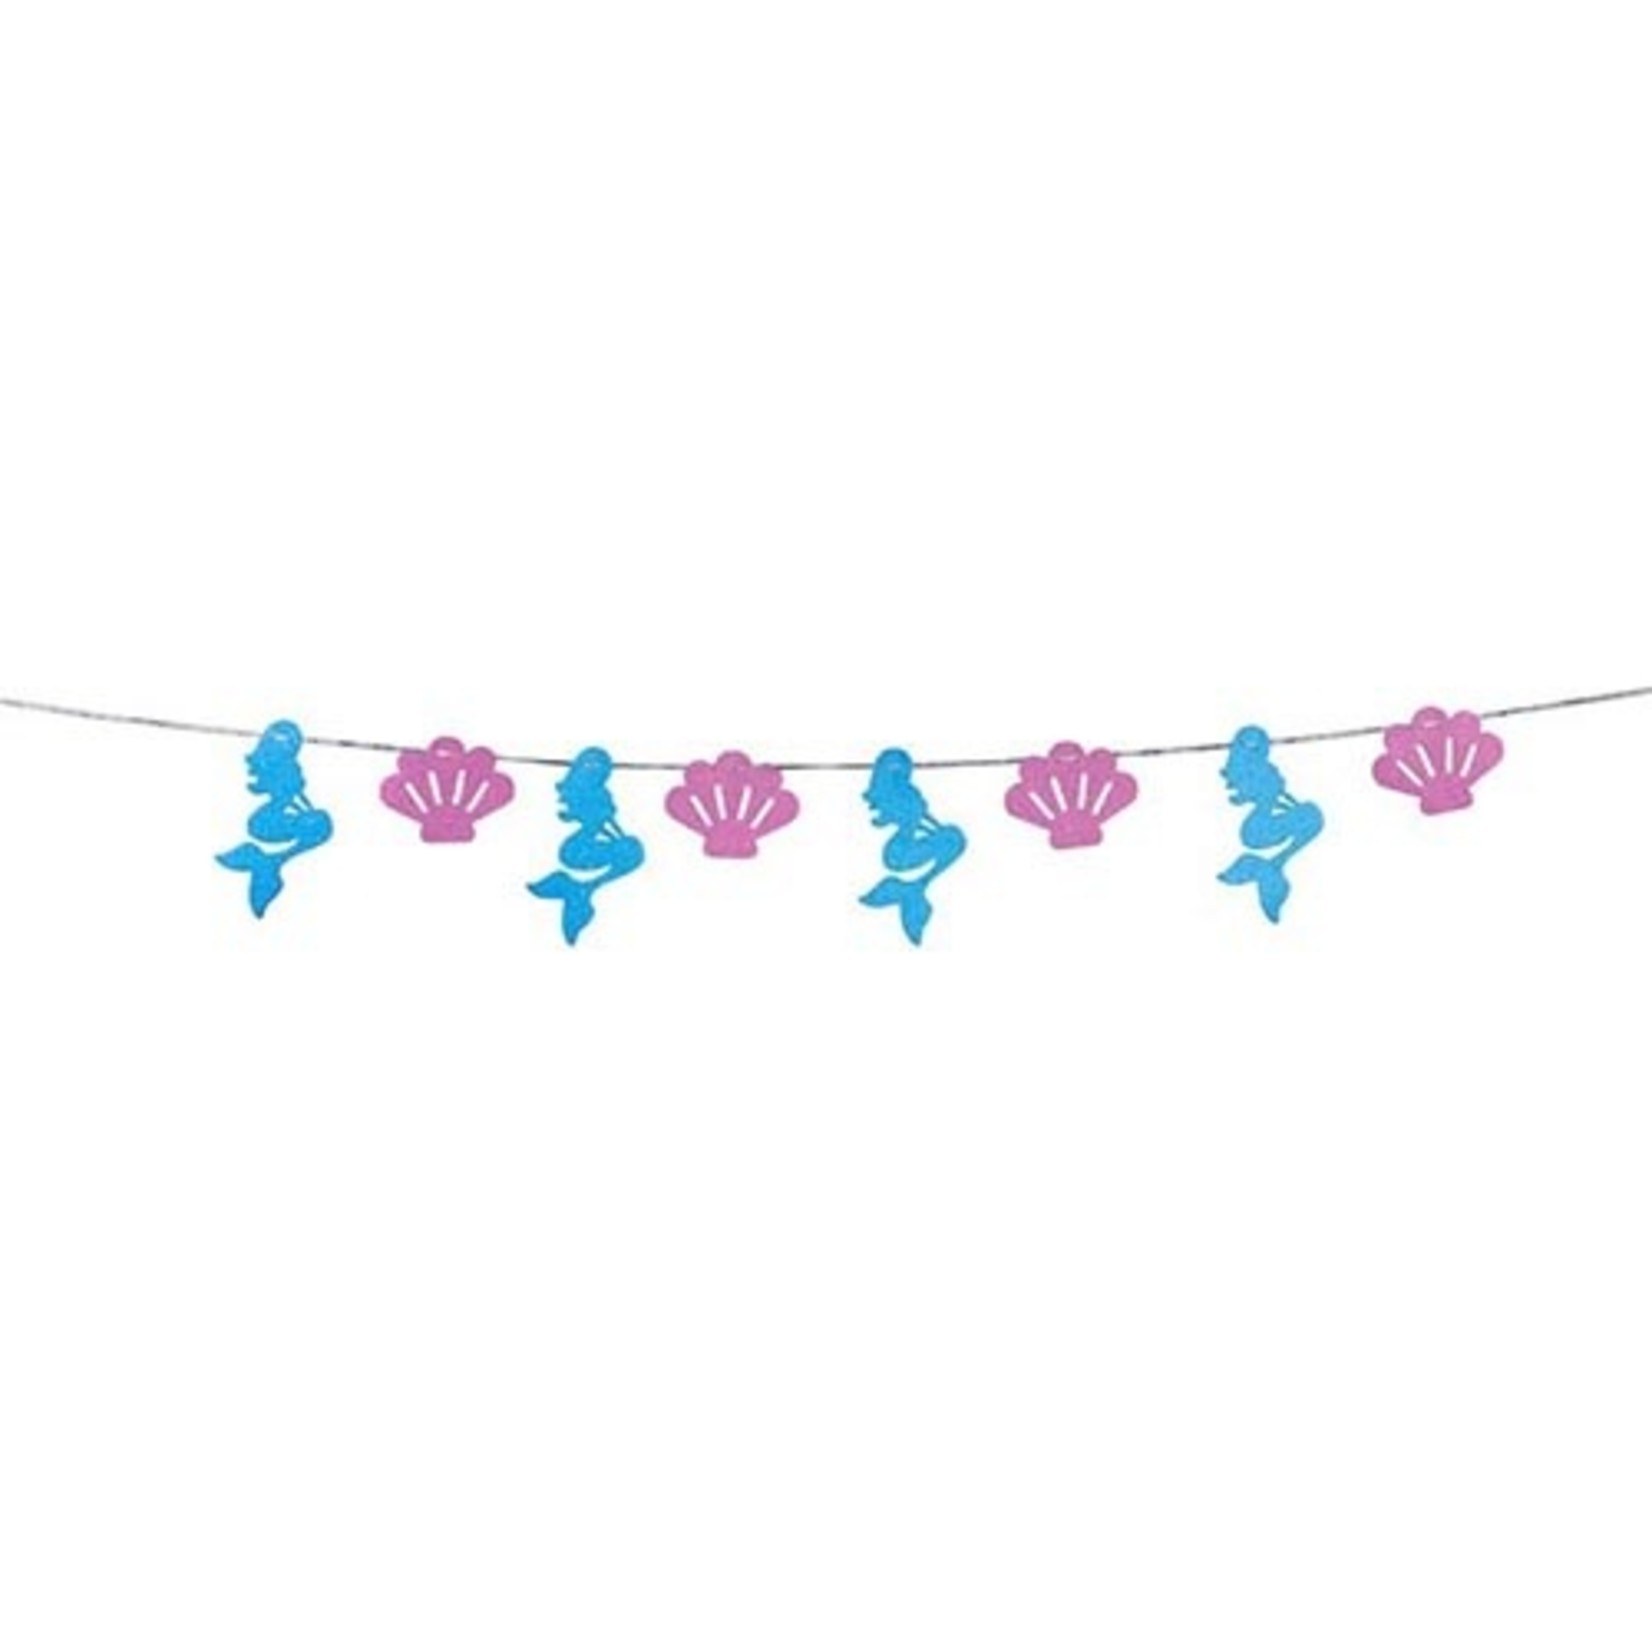 SKD Party by Forum Mermaid Glitter Banner - 6ft.